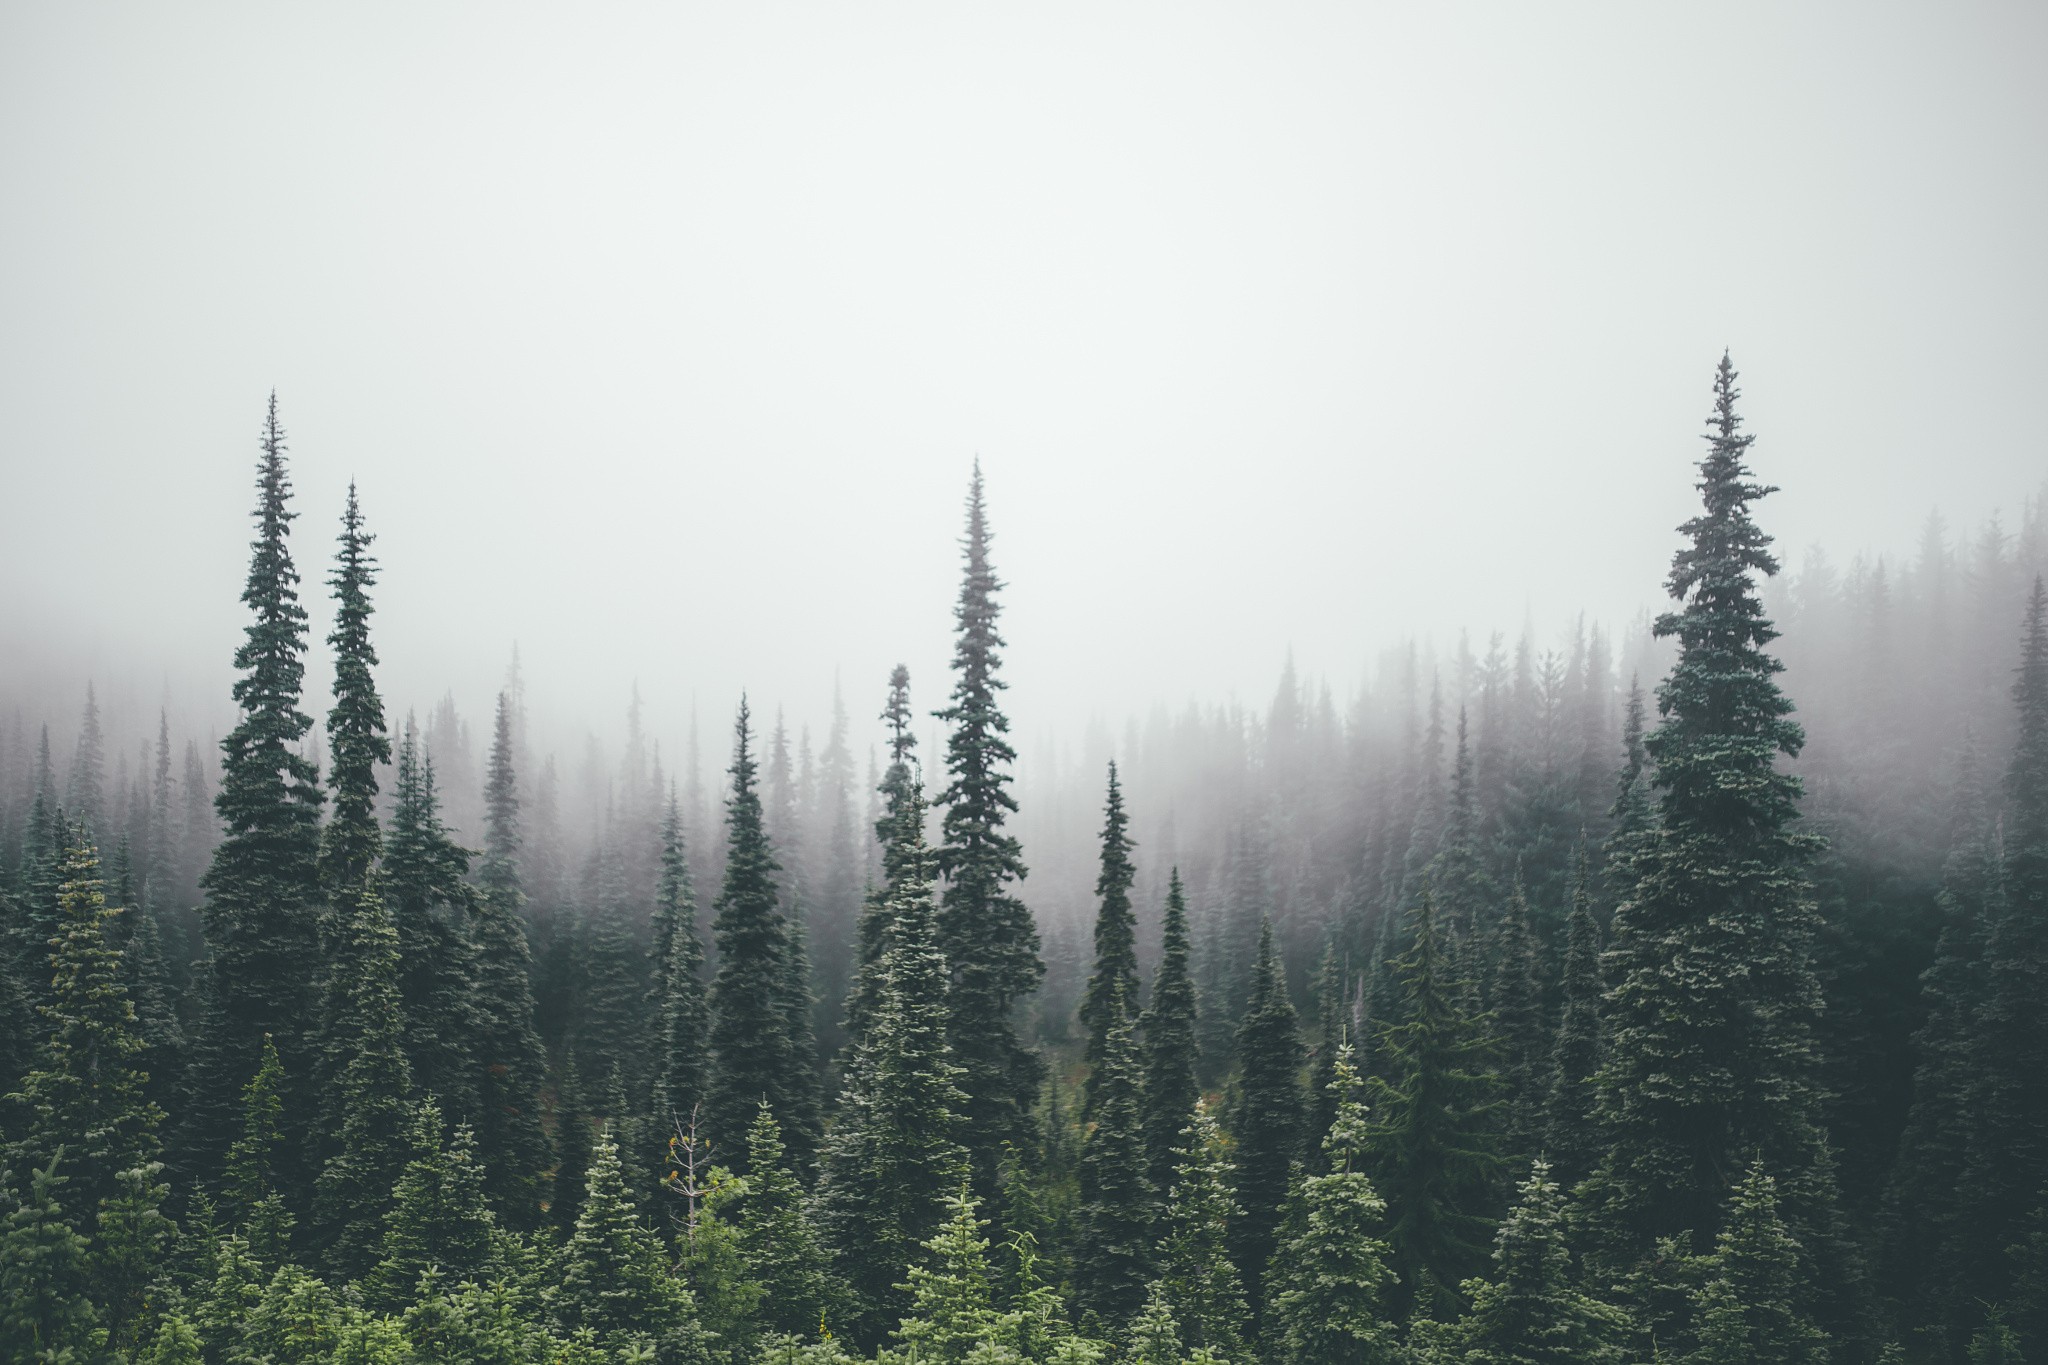 General 2048x1365 pine trees forest mist landscape wilderness nature trees